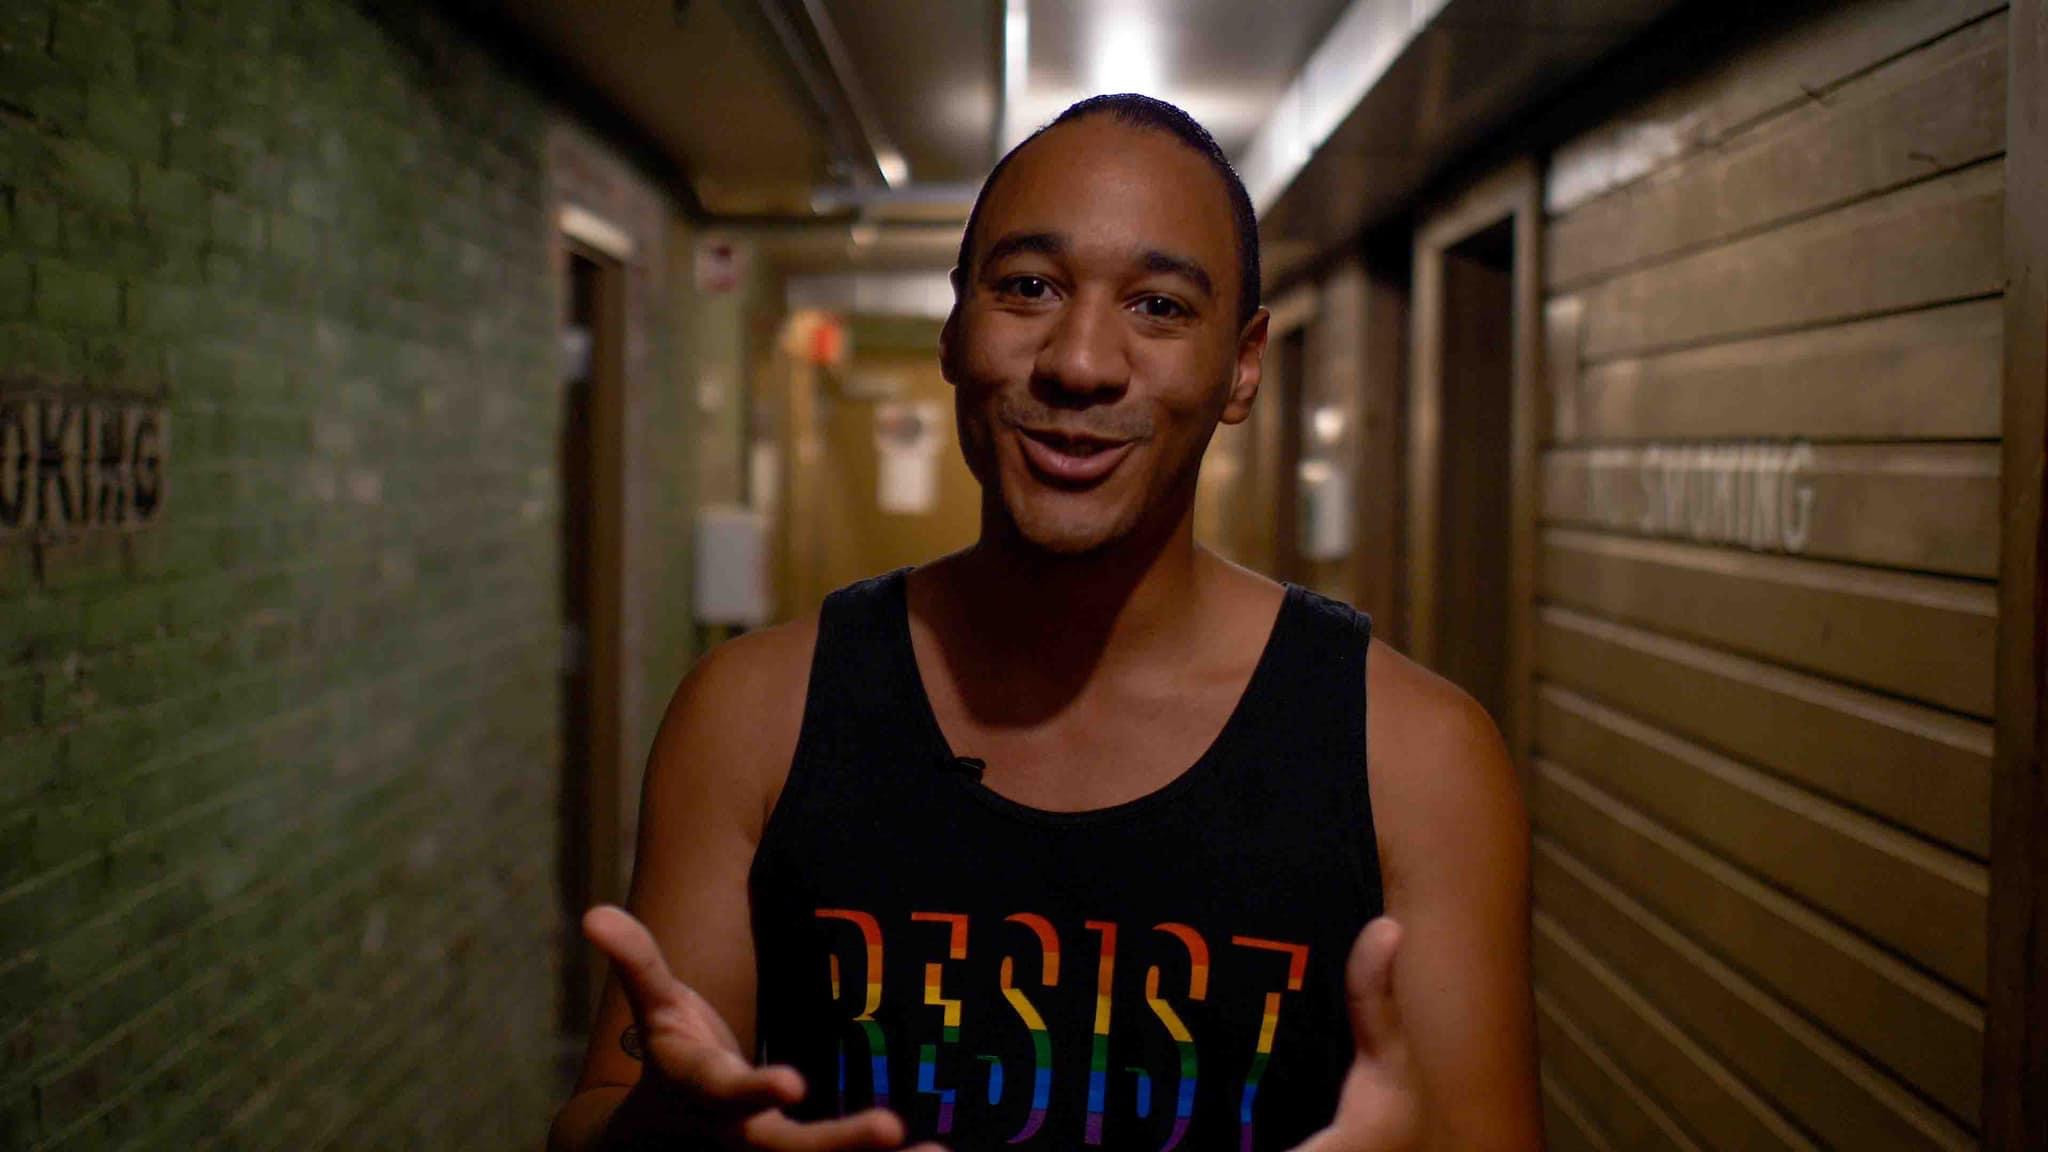 Caleb stands in a bright hallway with his arms out towards the camera. His palm are open as if he is greeting us. He is wearing a black tanktop with the word 'Resist' which is also in black but its form made clear thruough the use of a rainbow dropshadow on each letter.